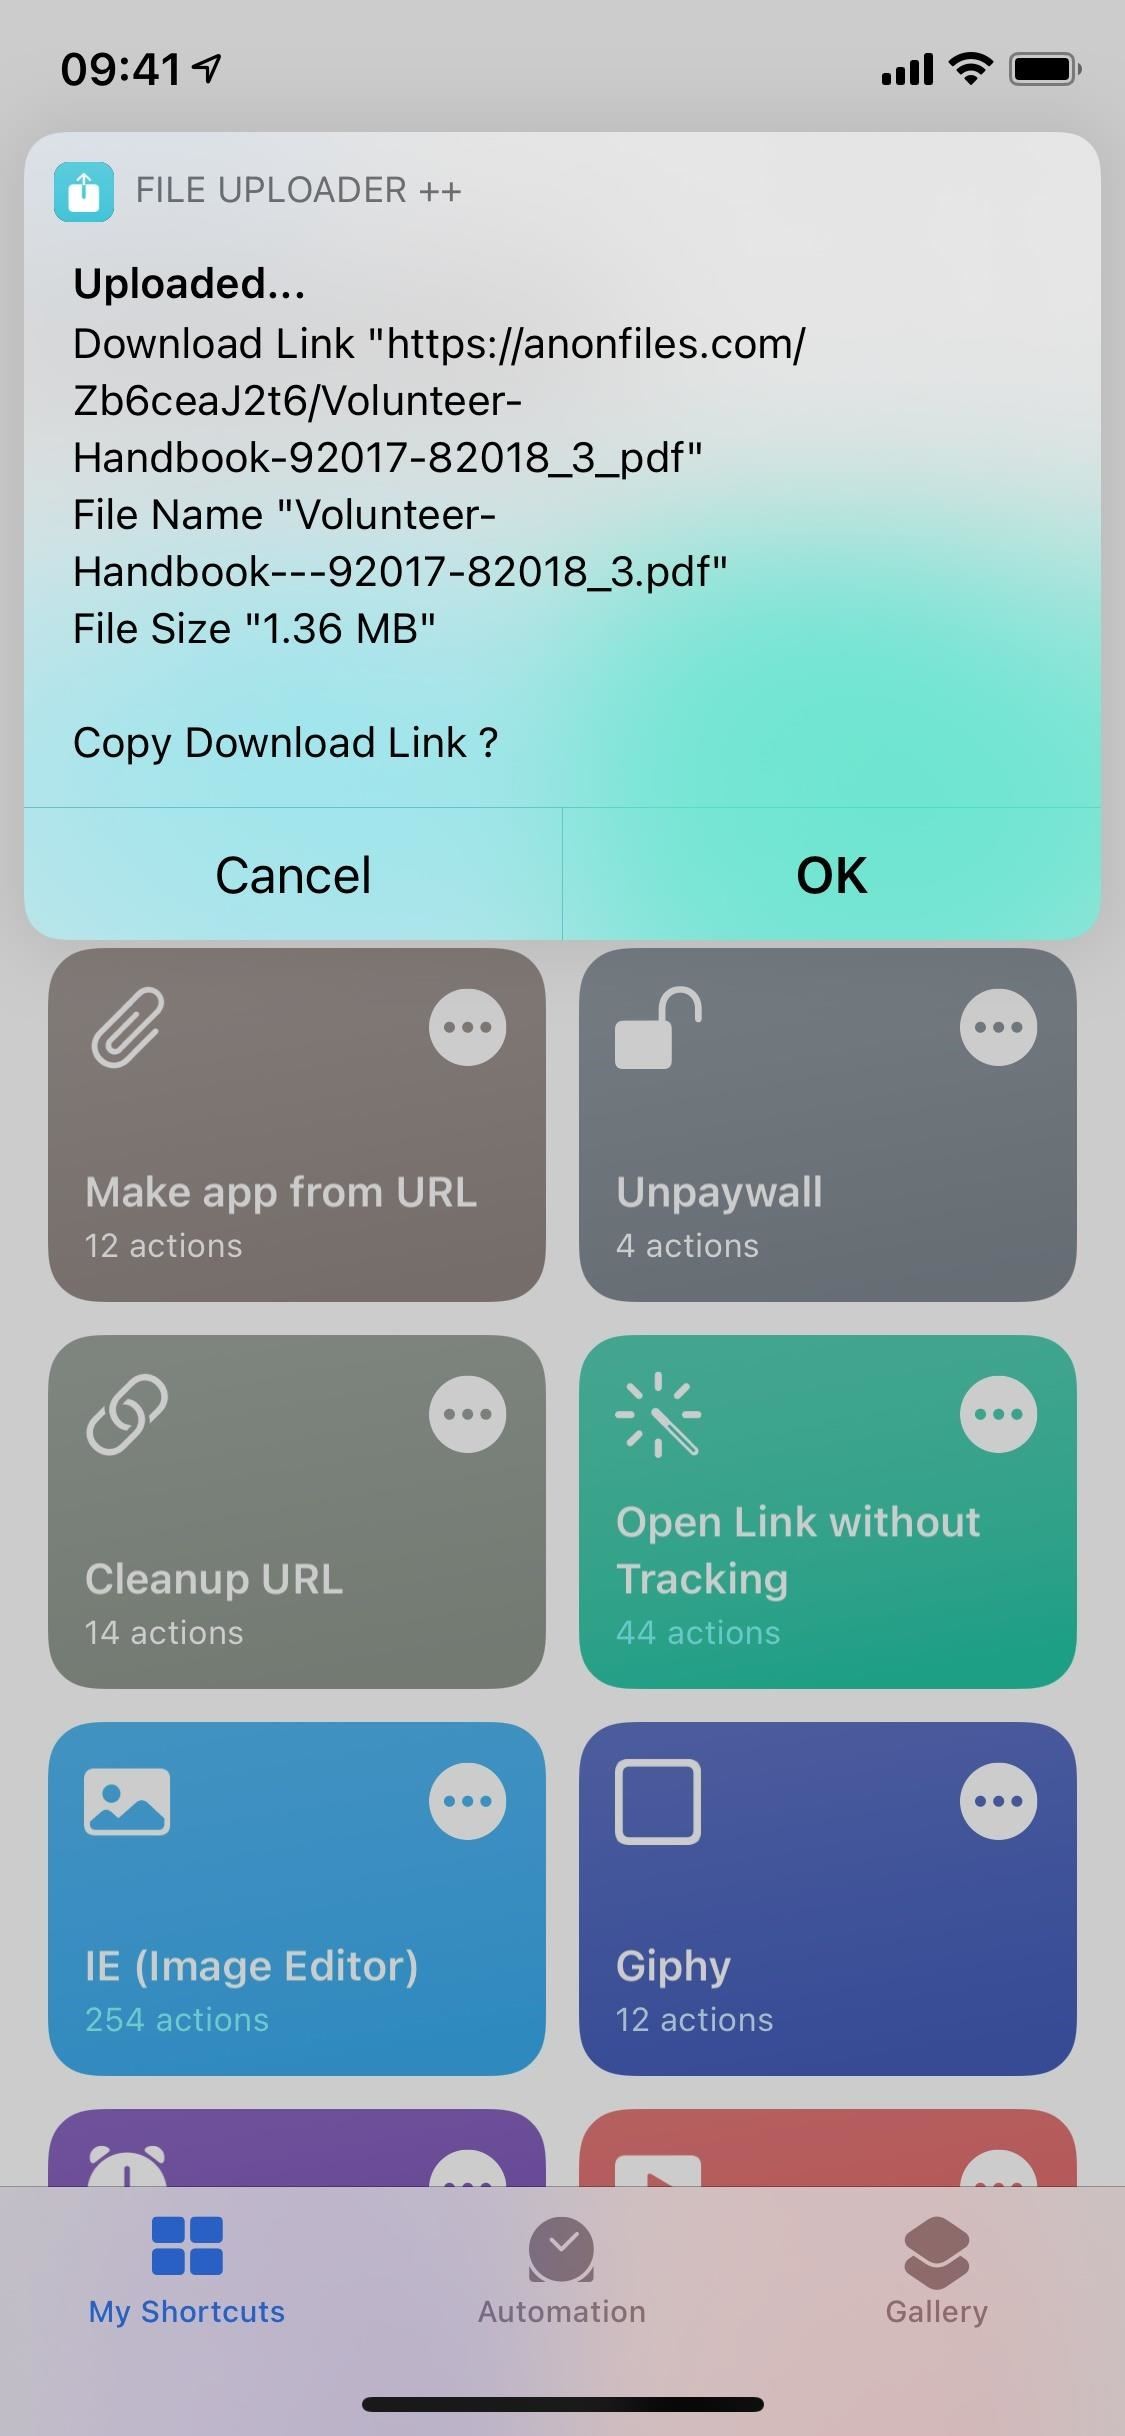 The Easy Way to Upload Files Anonymously from Your iPhone So They Can't Be Traced Back to You